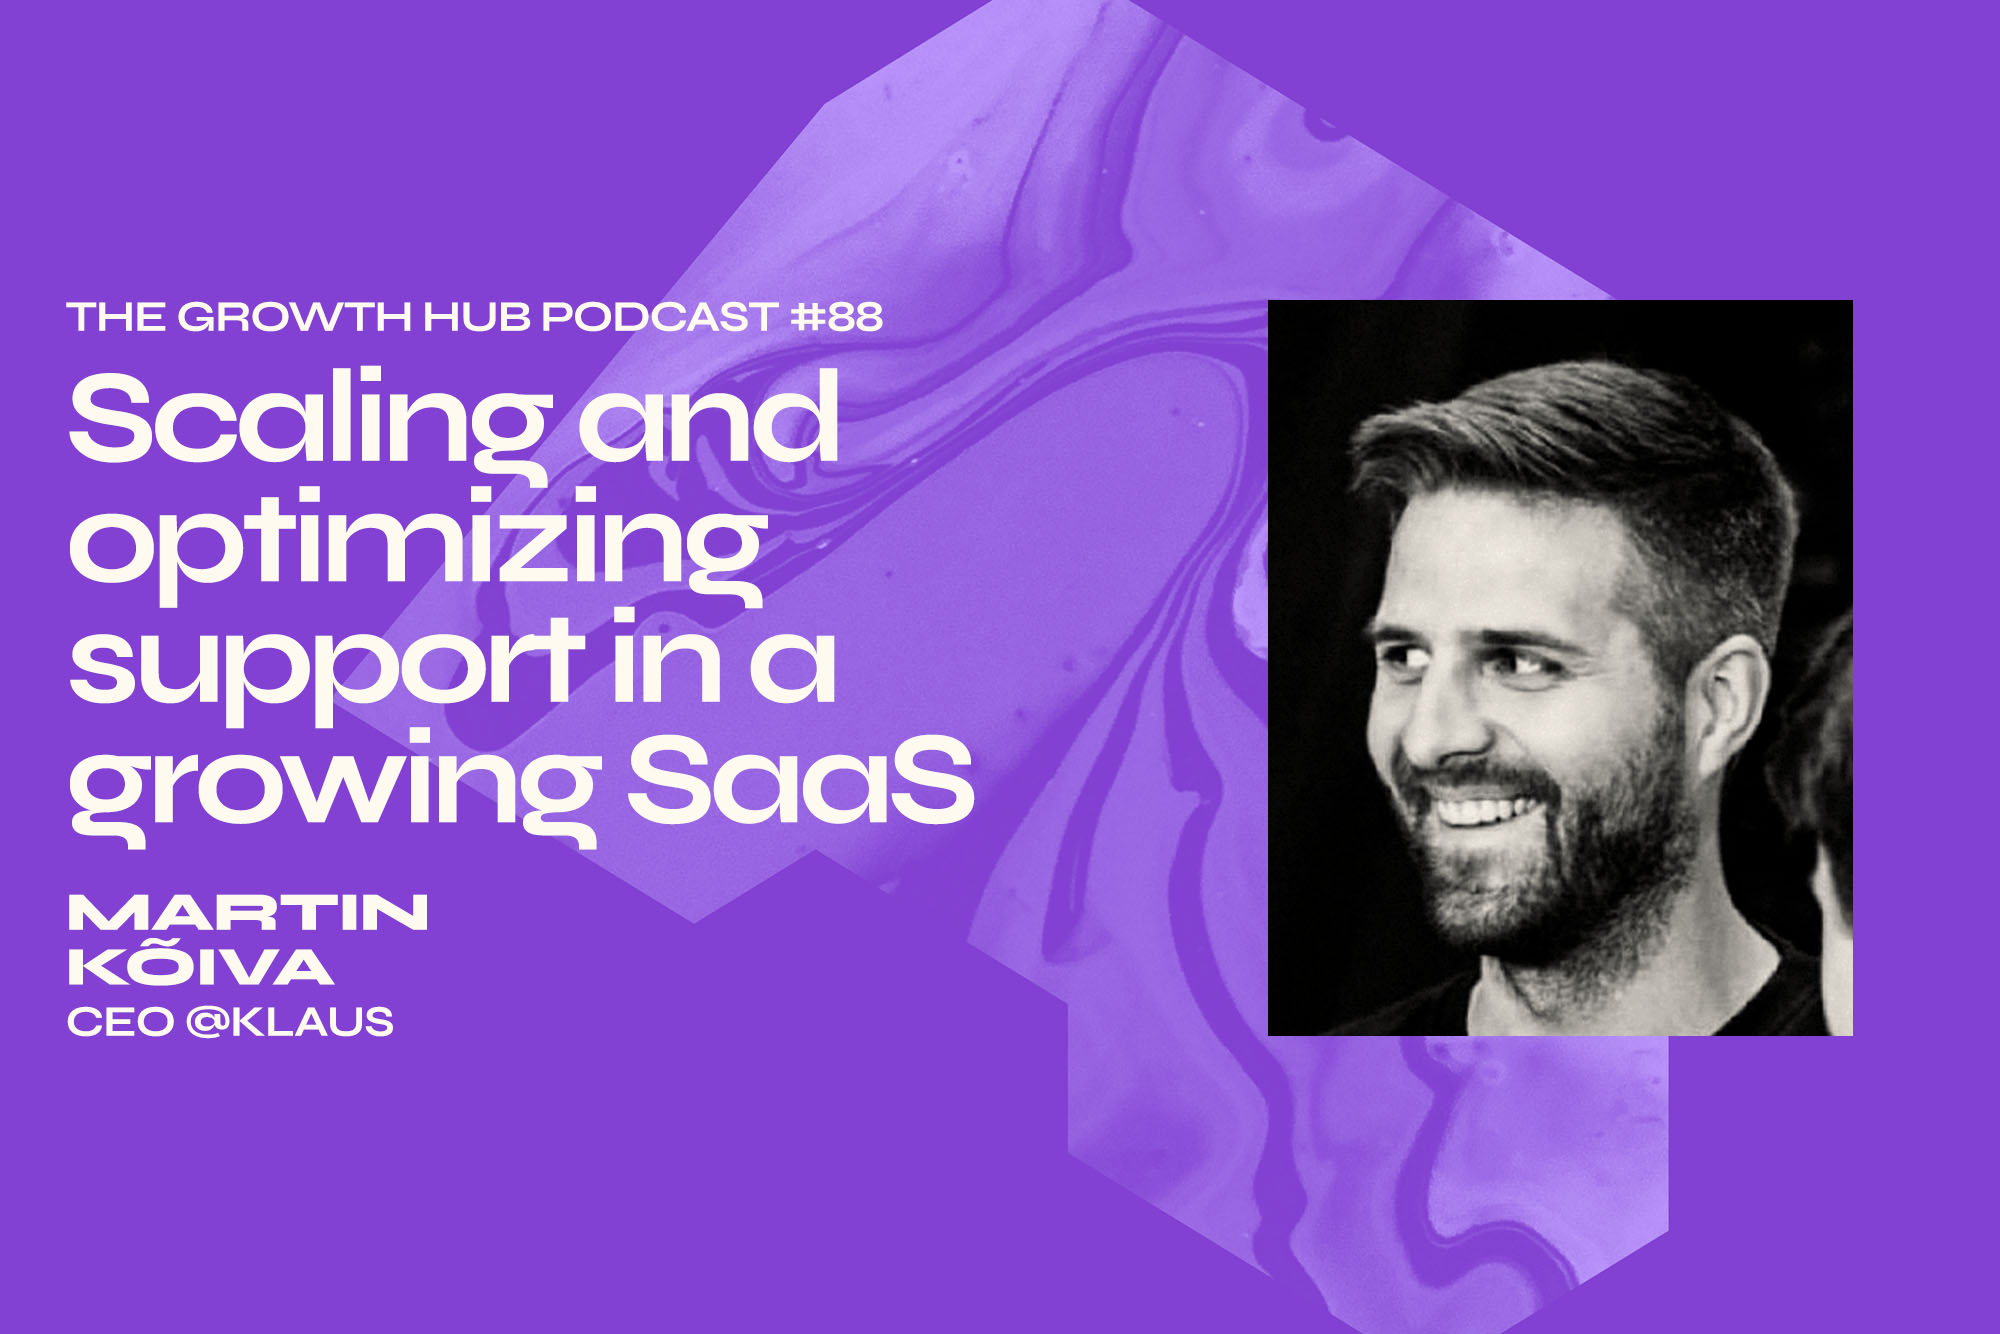 [Podcast] How to scale and optimize support in a growing SaaS company